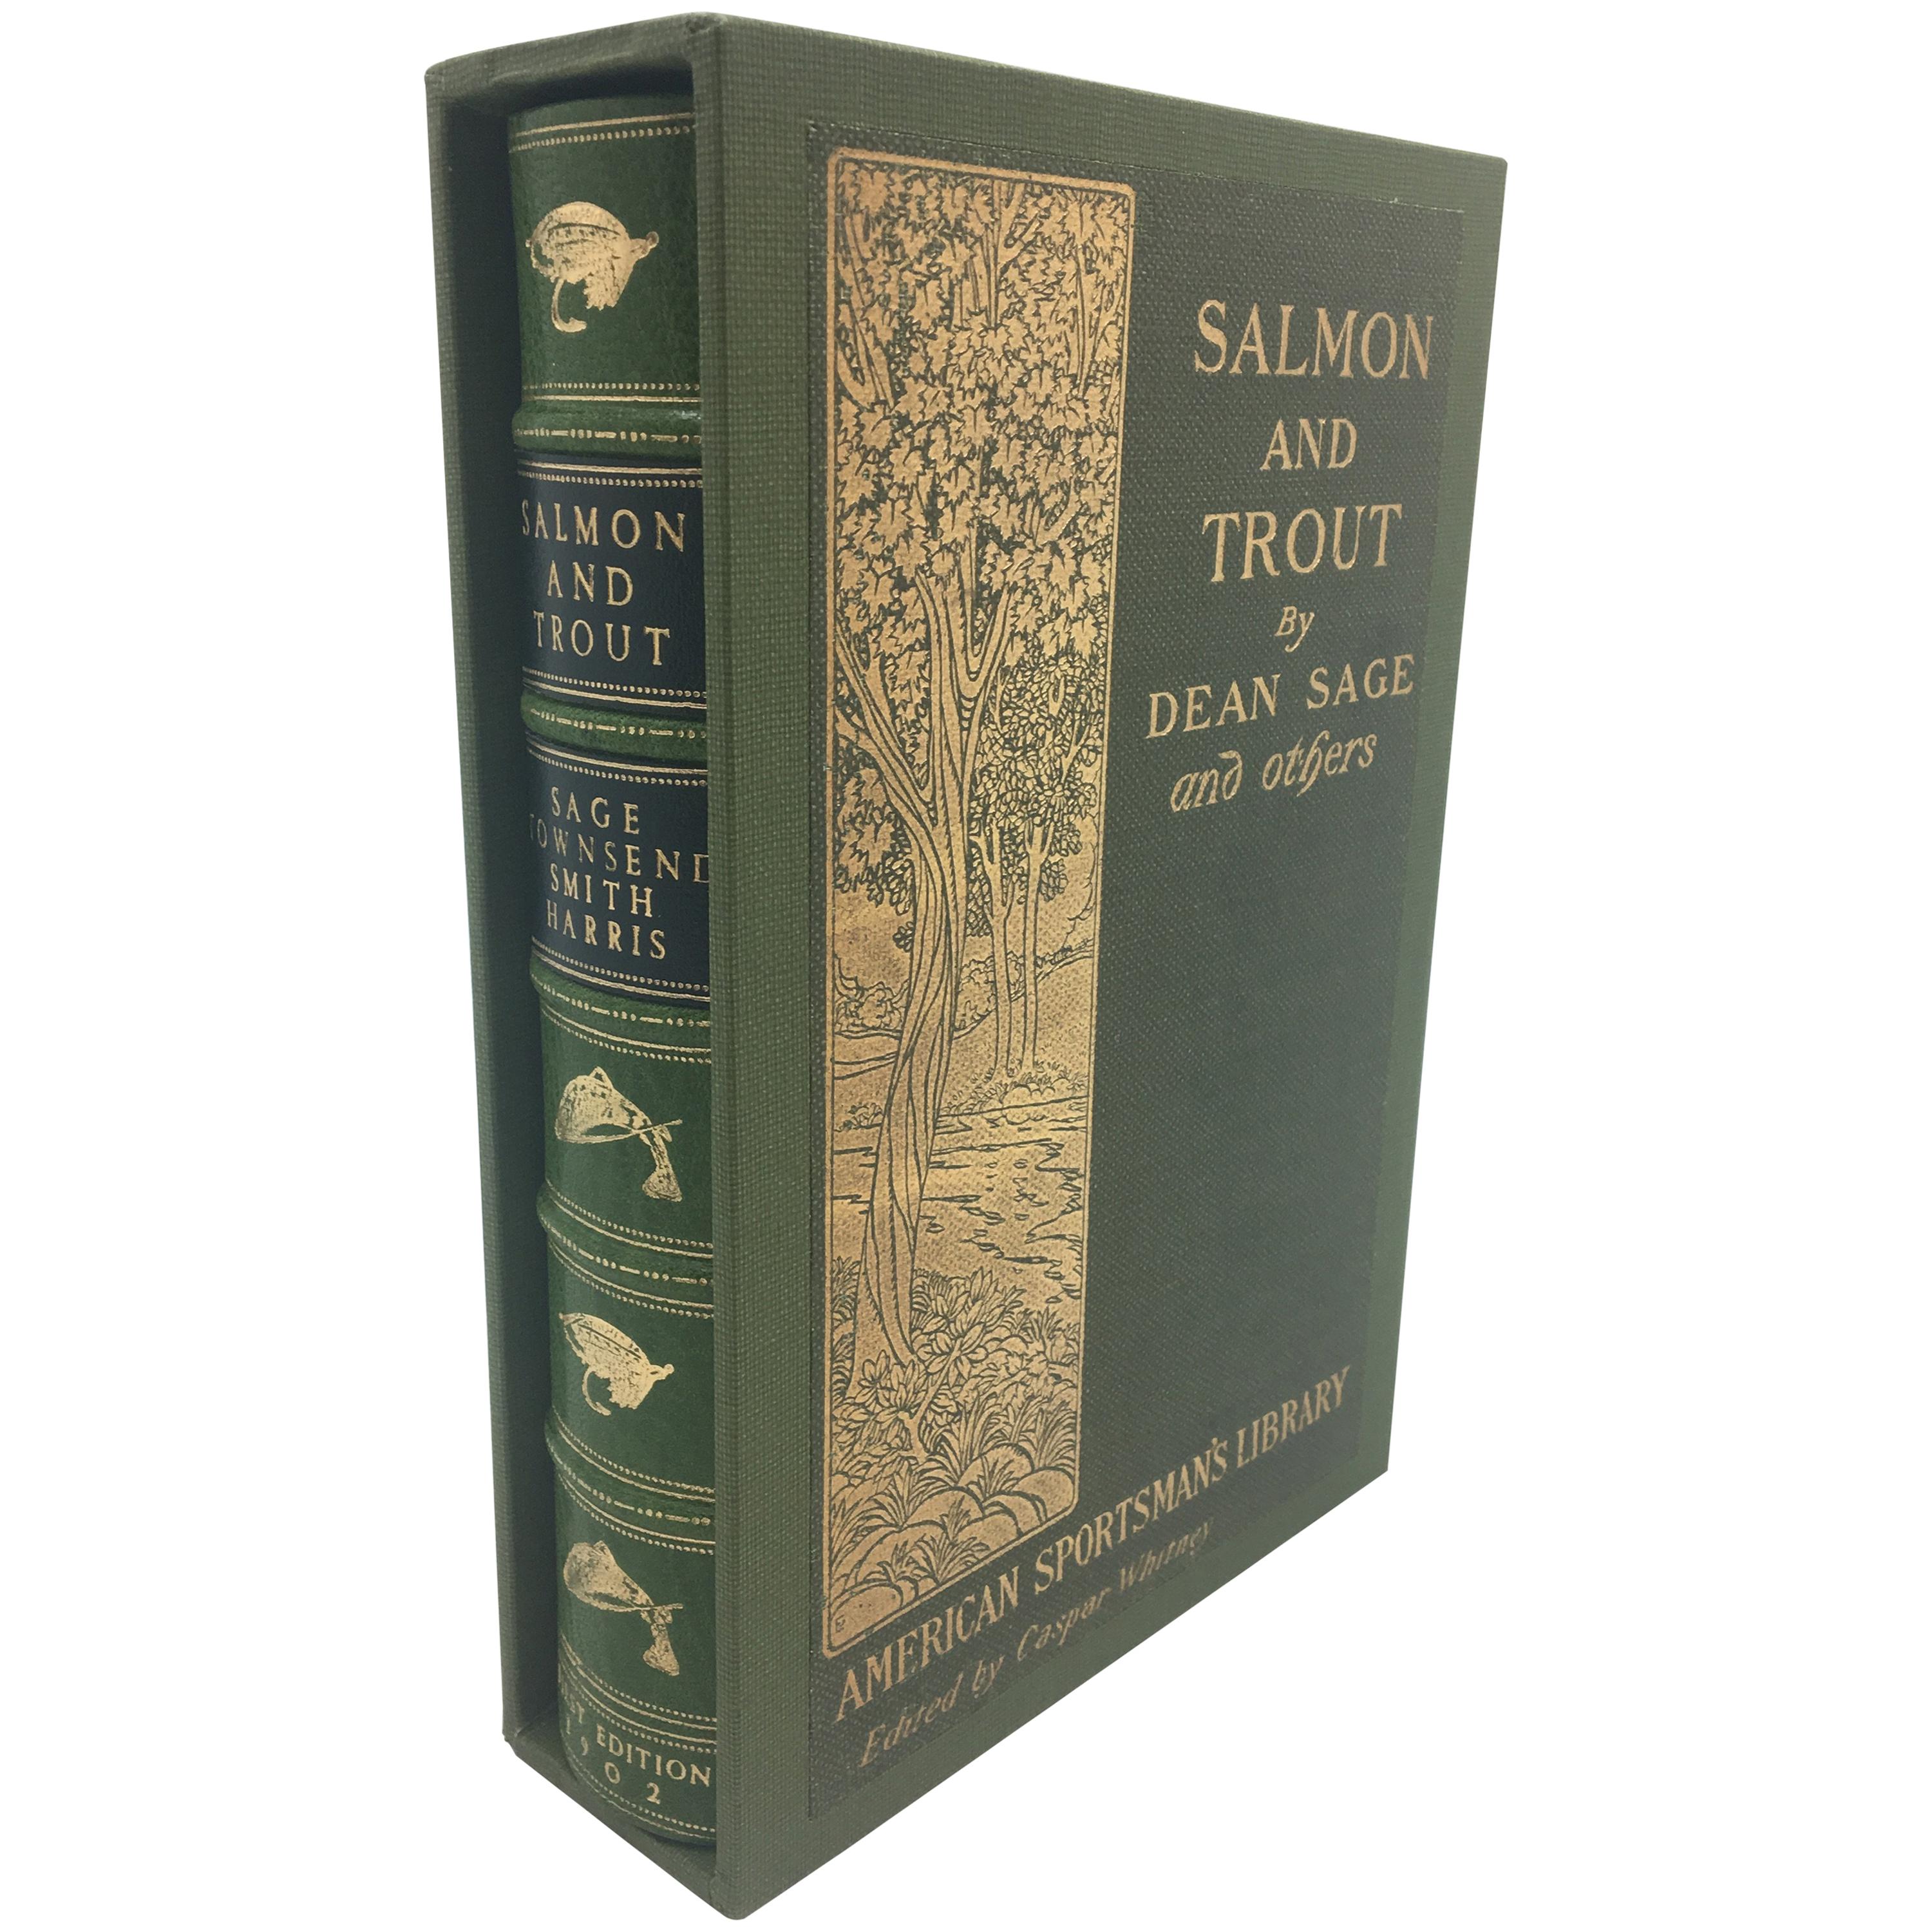 "Salmon and Trout" by Dean Sage and Others, First Edition, 1902